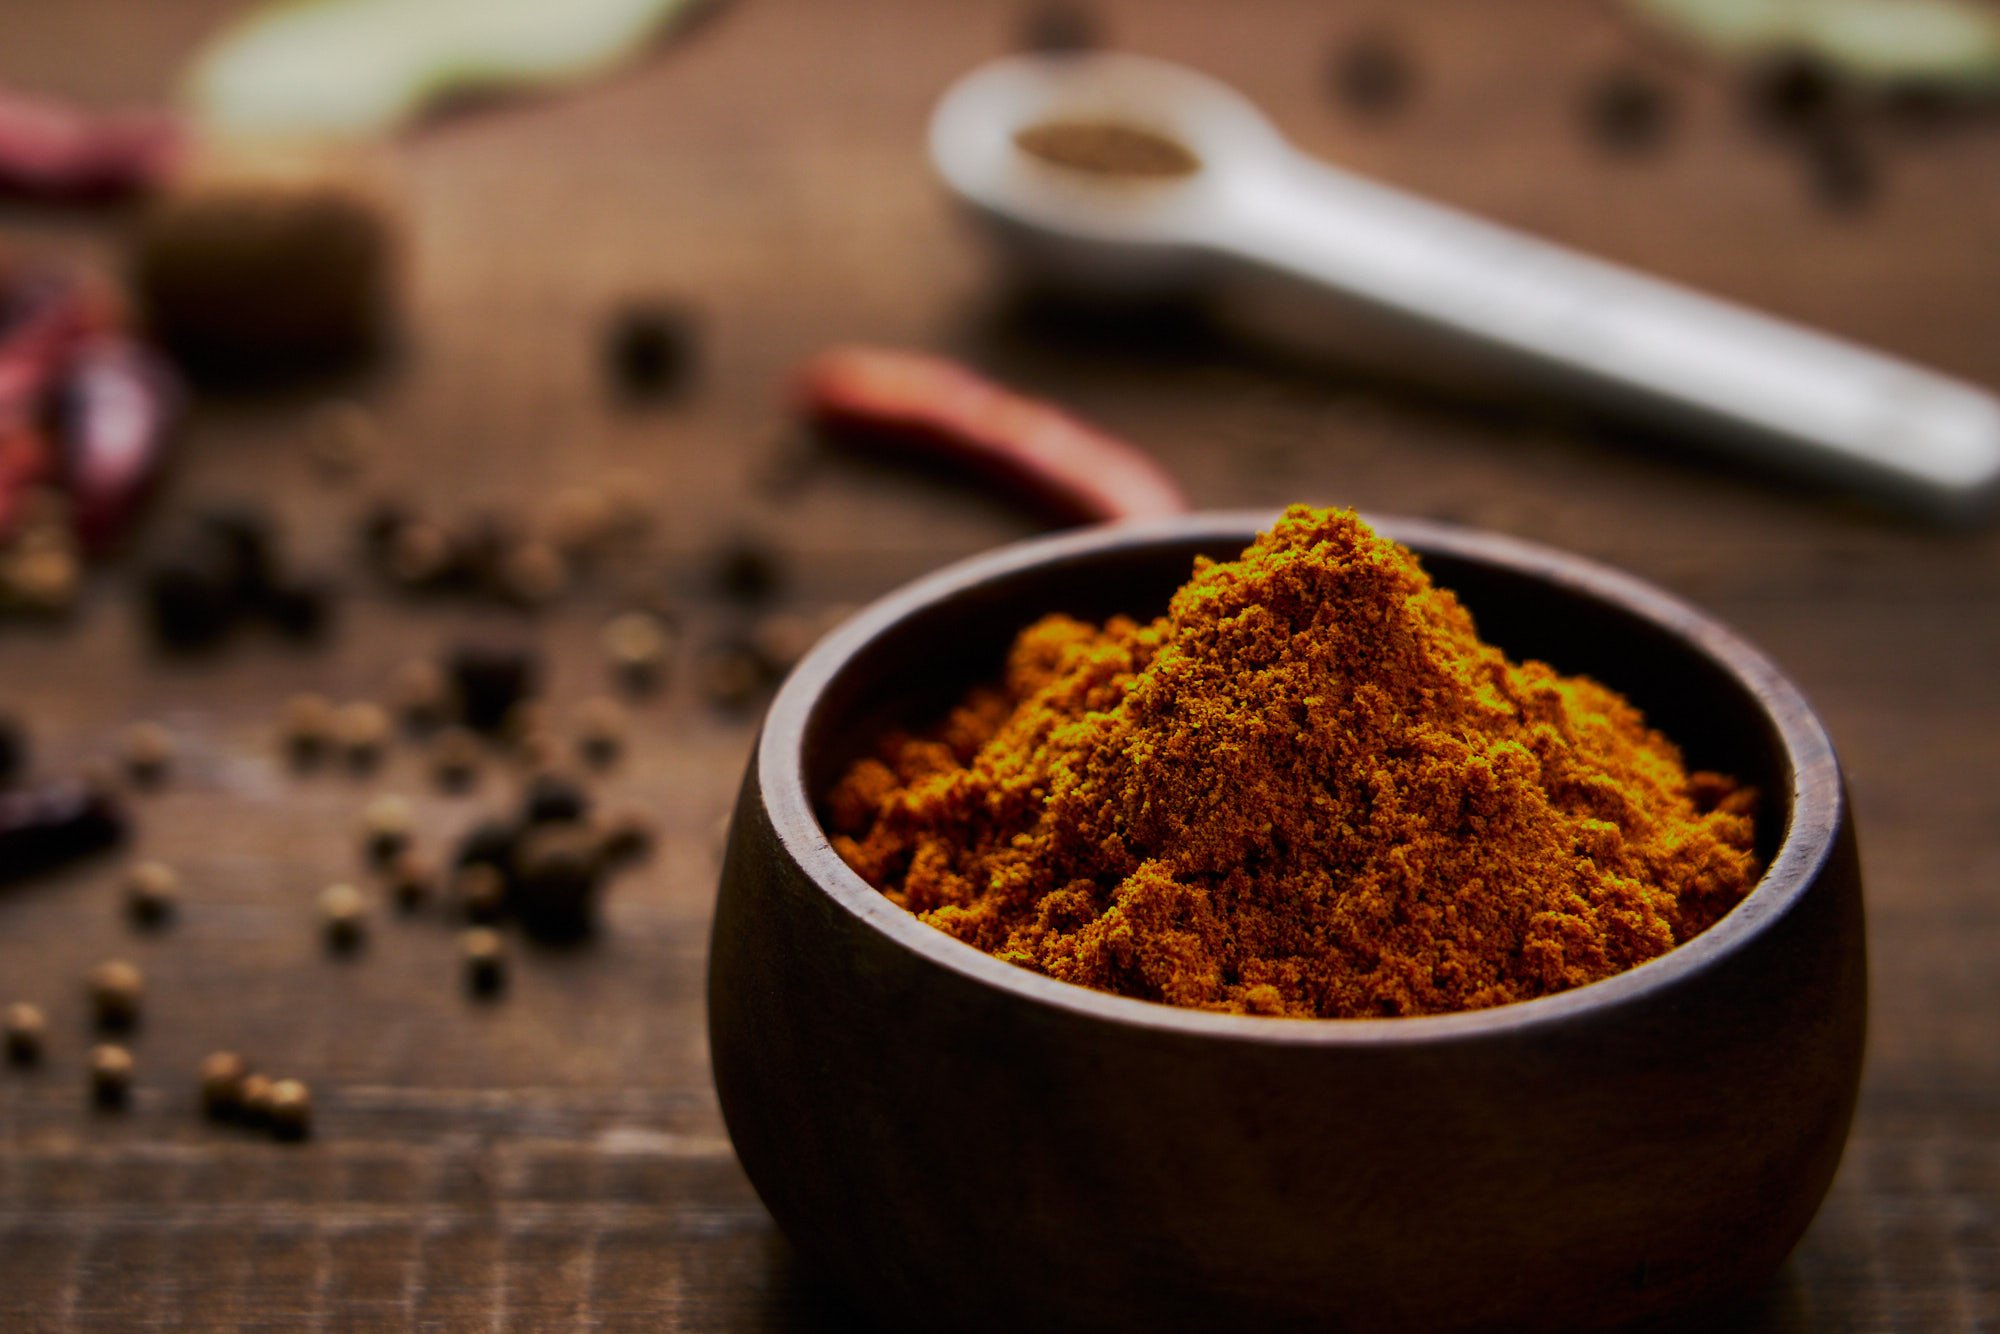 Golden Japanese curry powder made with 20 different spices, including turmeric, cumin, coriander, star anise, citrus zest, dill, and sage.